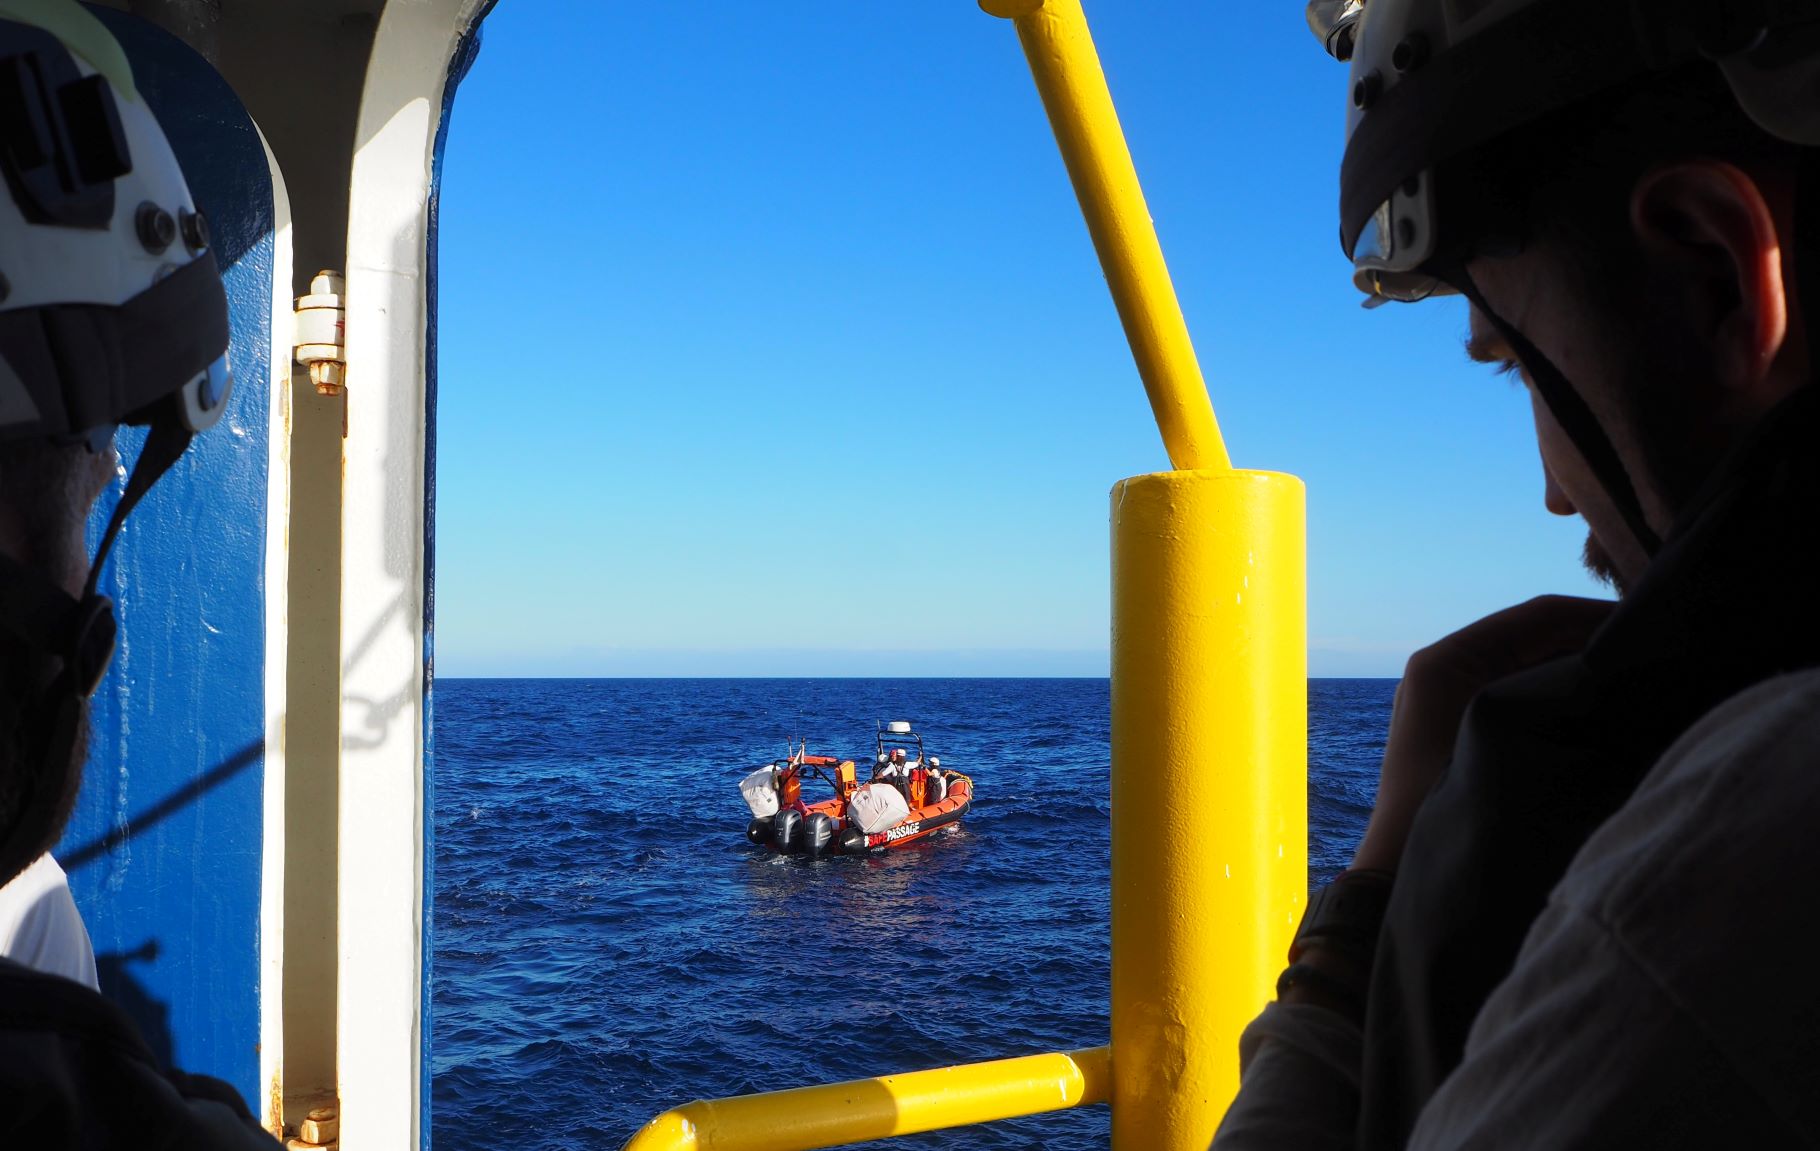 Only three NGO search and rescue boats are expected to patrol a substantial part of the Mediterranean this winter (MEE/Tom )